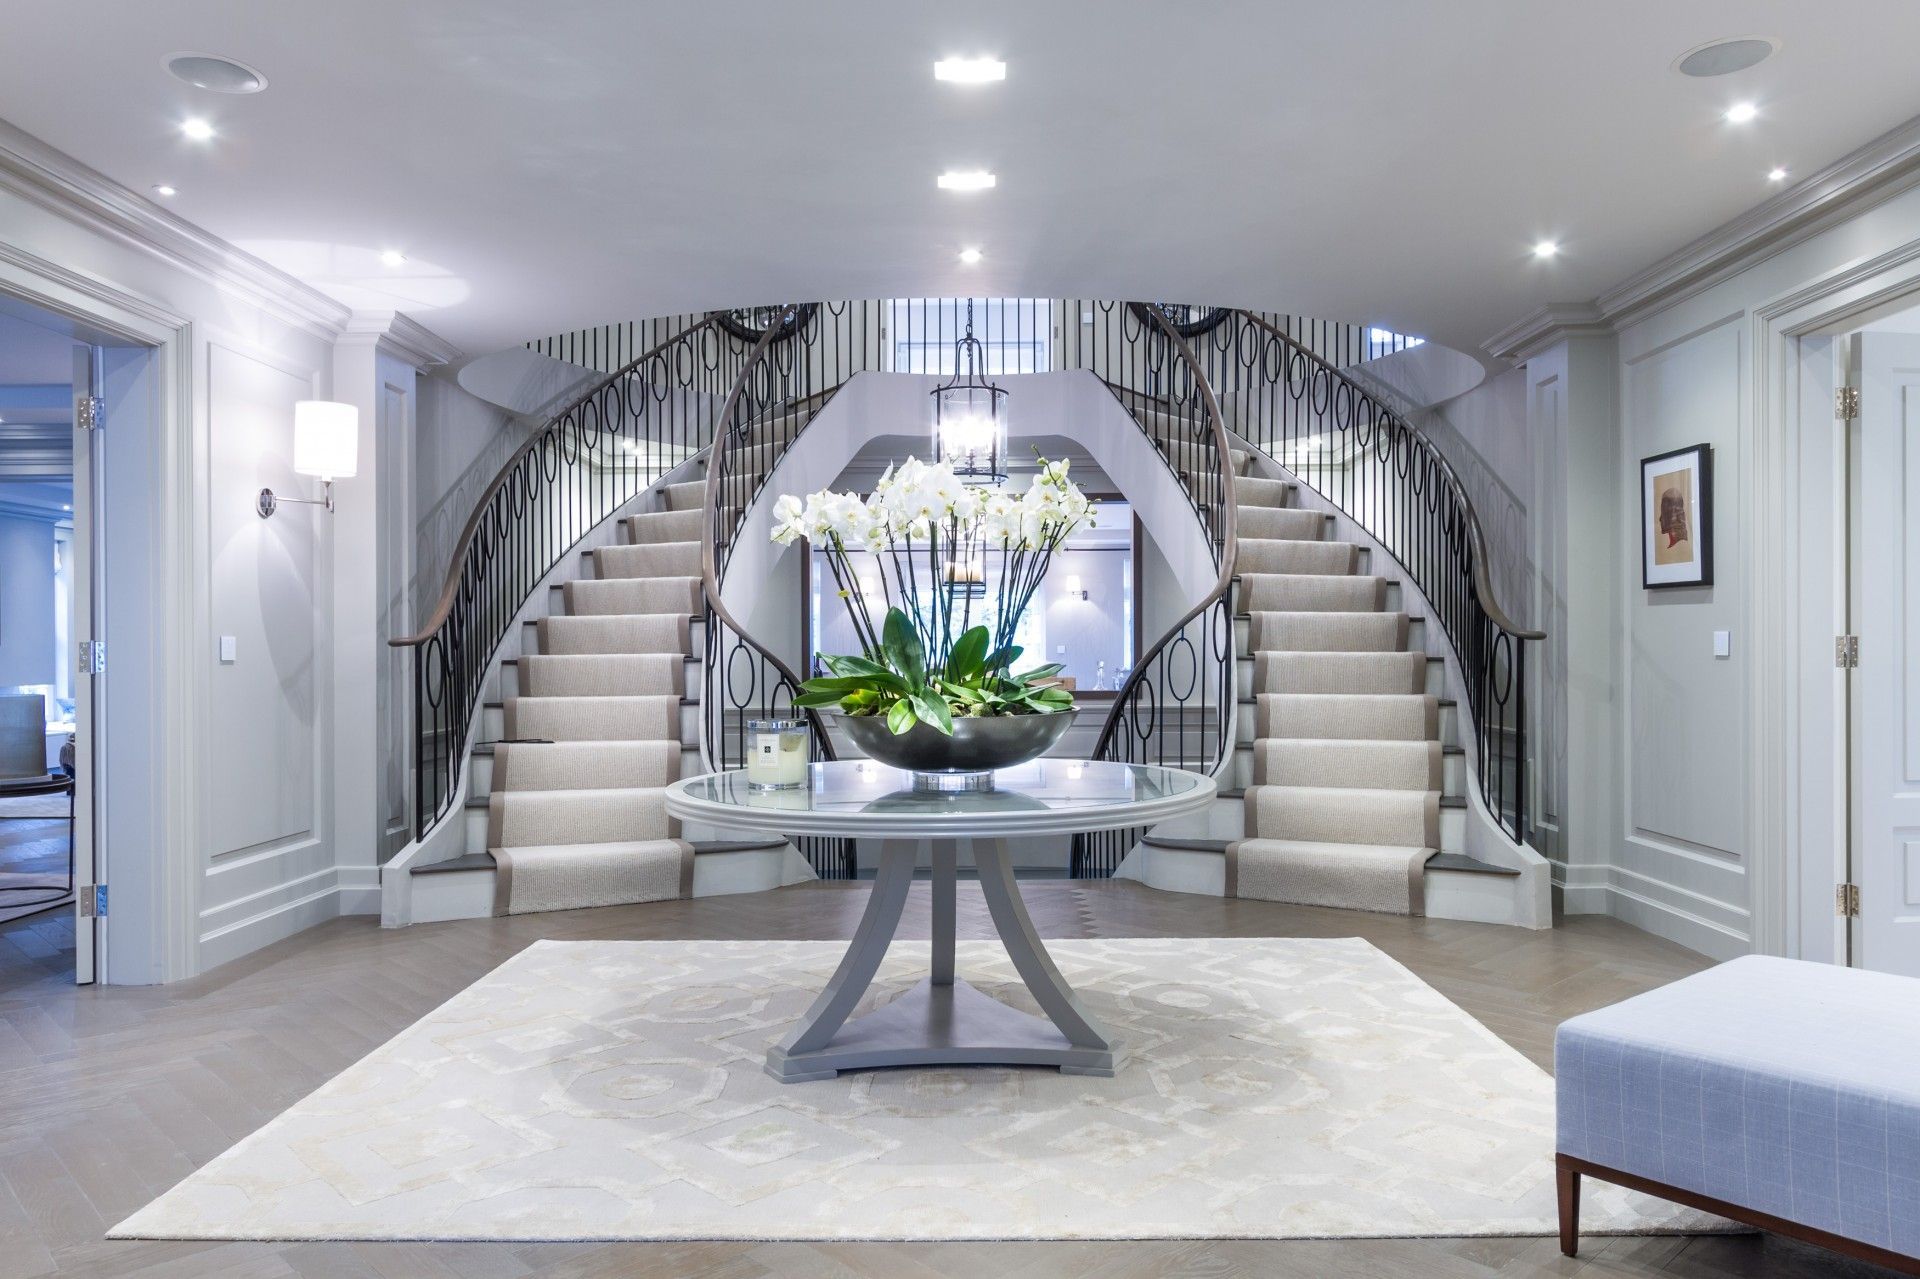 Make your staircase the star of your home with interior designer tips